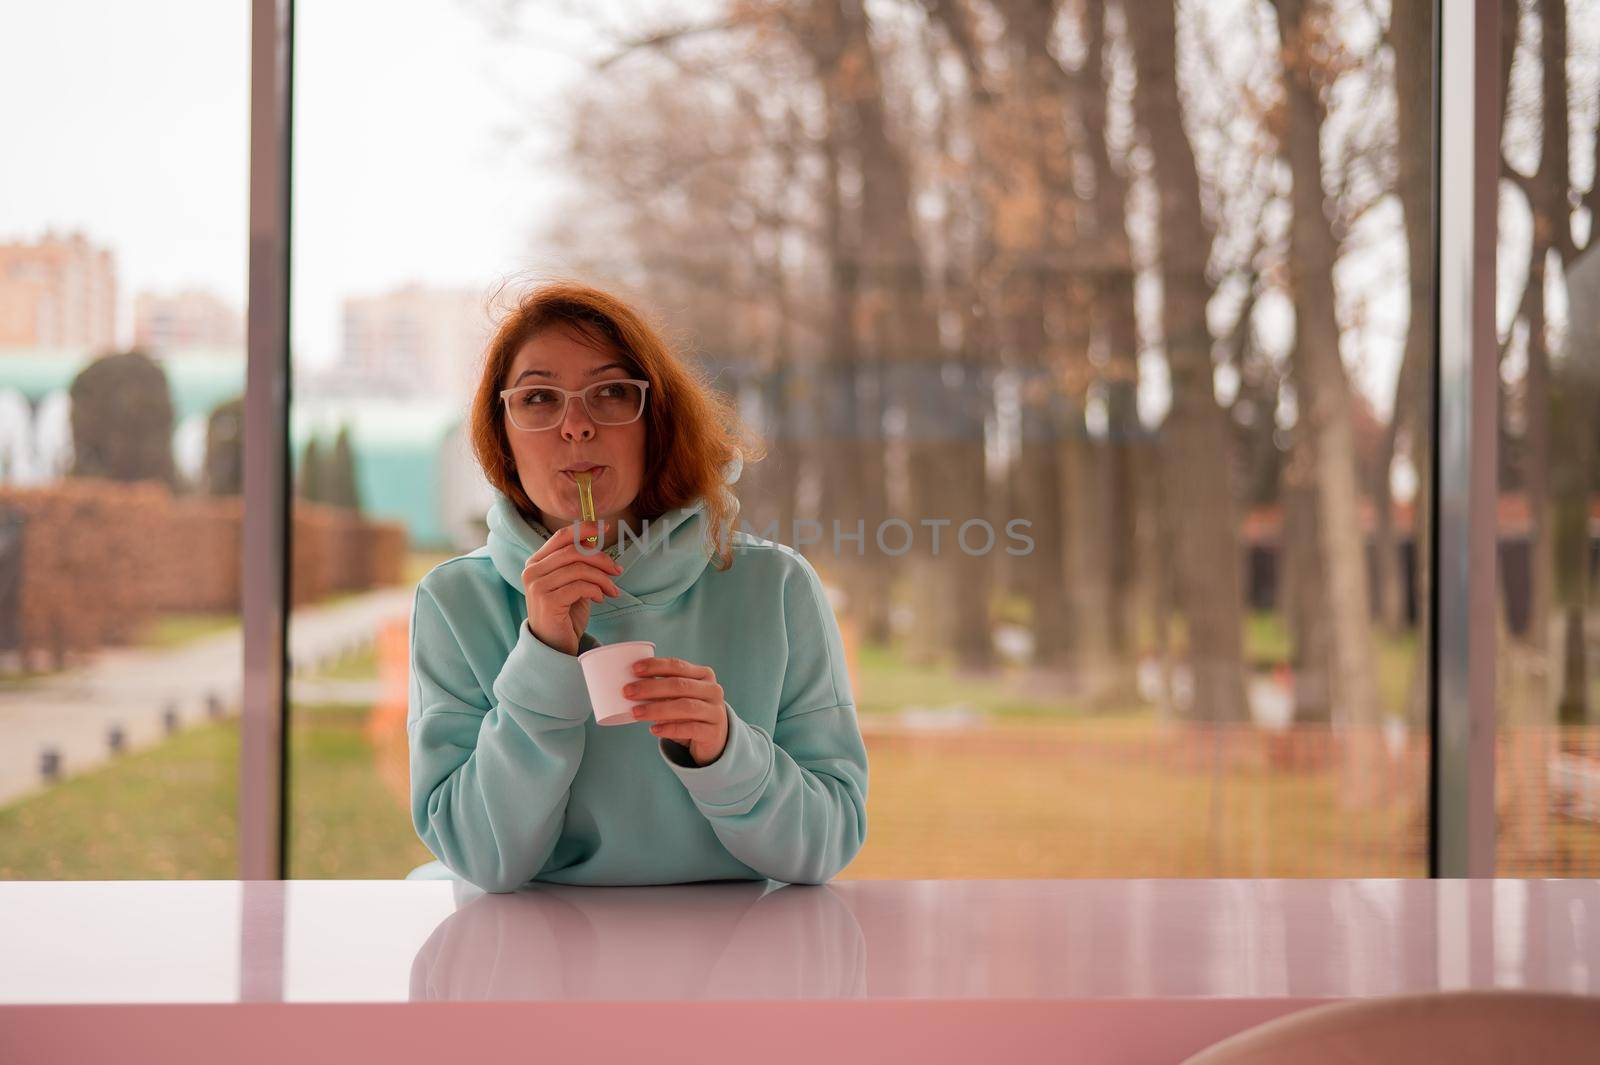 Caucasian red-haired woman eats ice cream with a plastic spoon while sitting alone in a cafe. by mrwed54